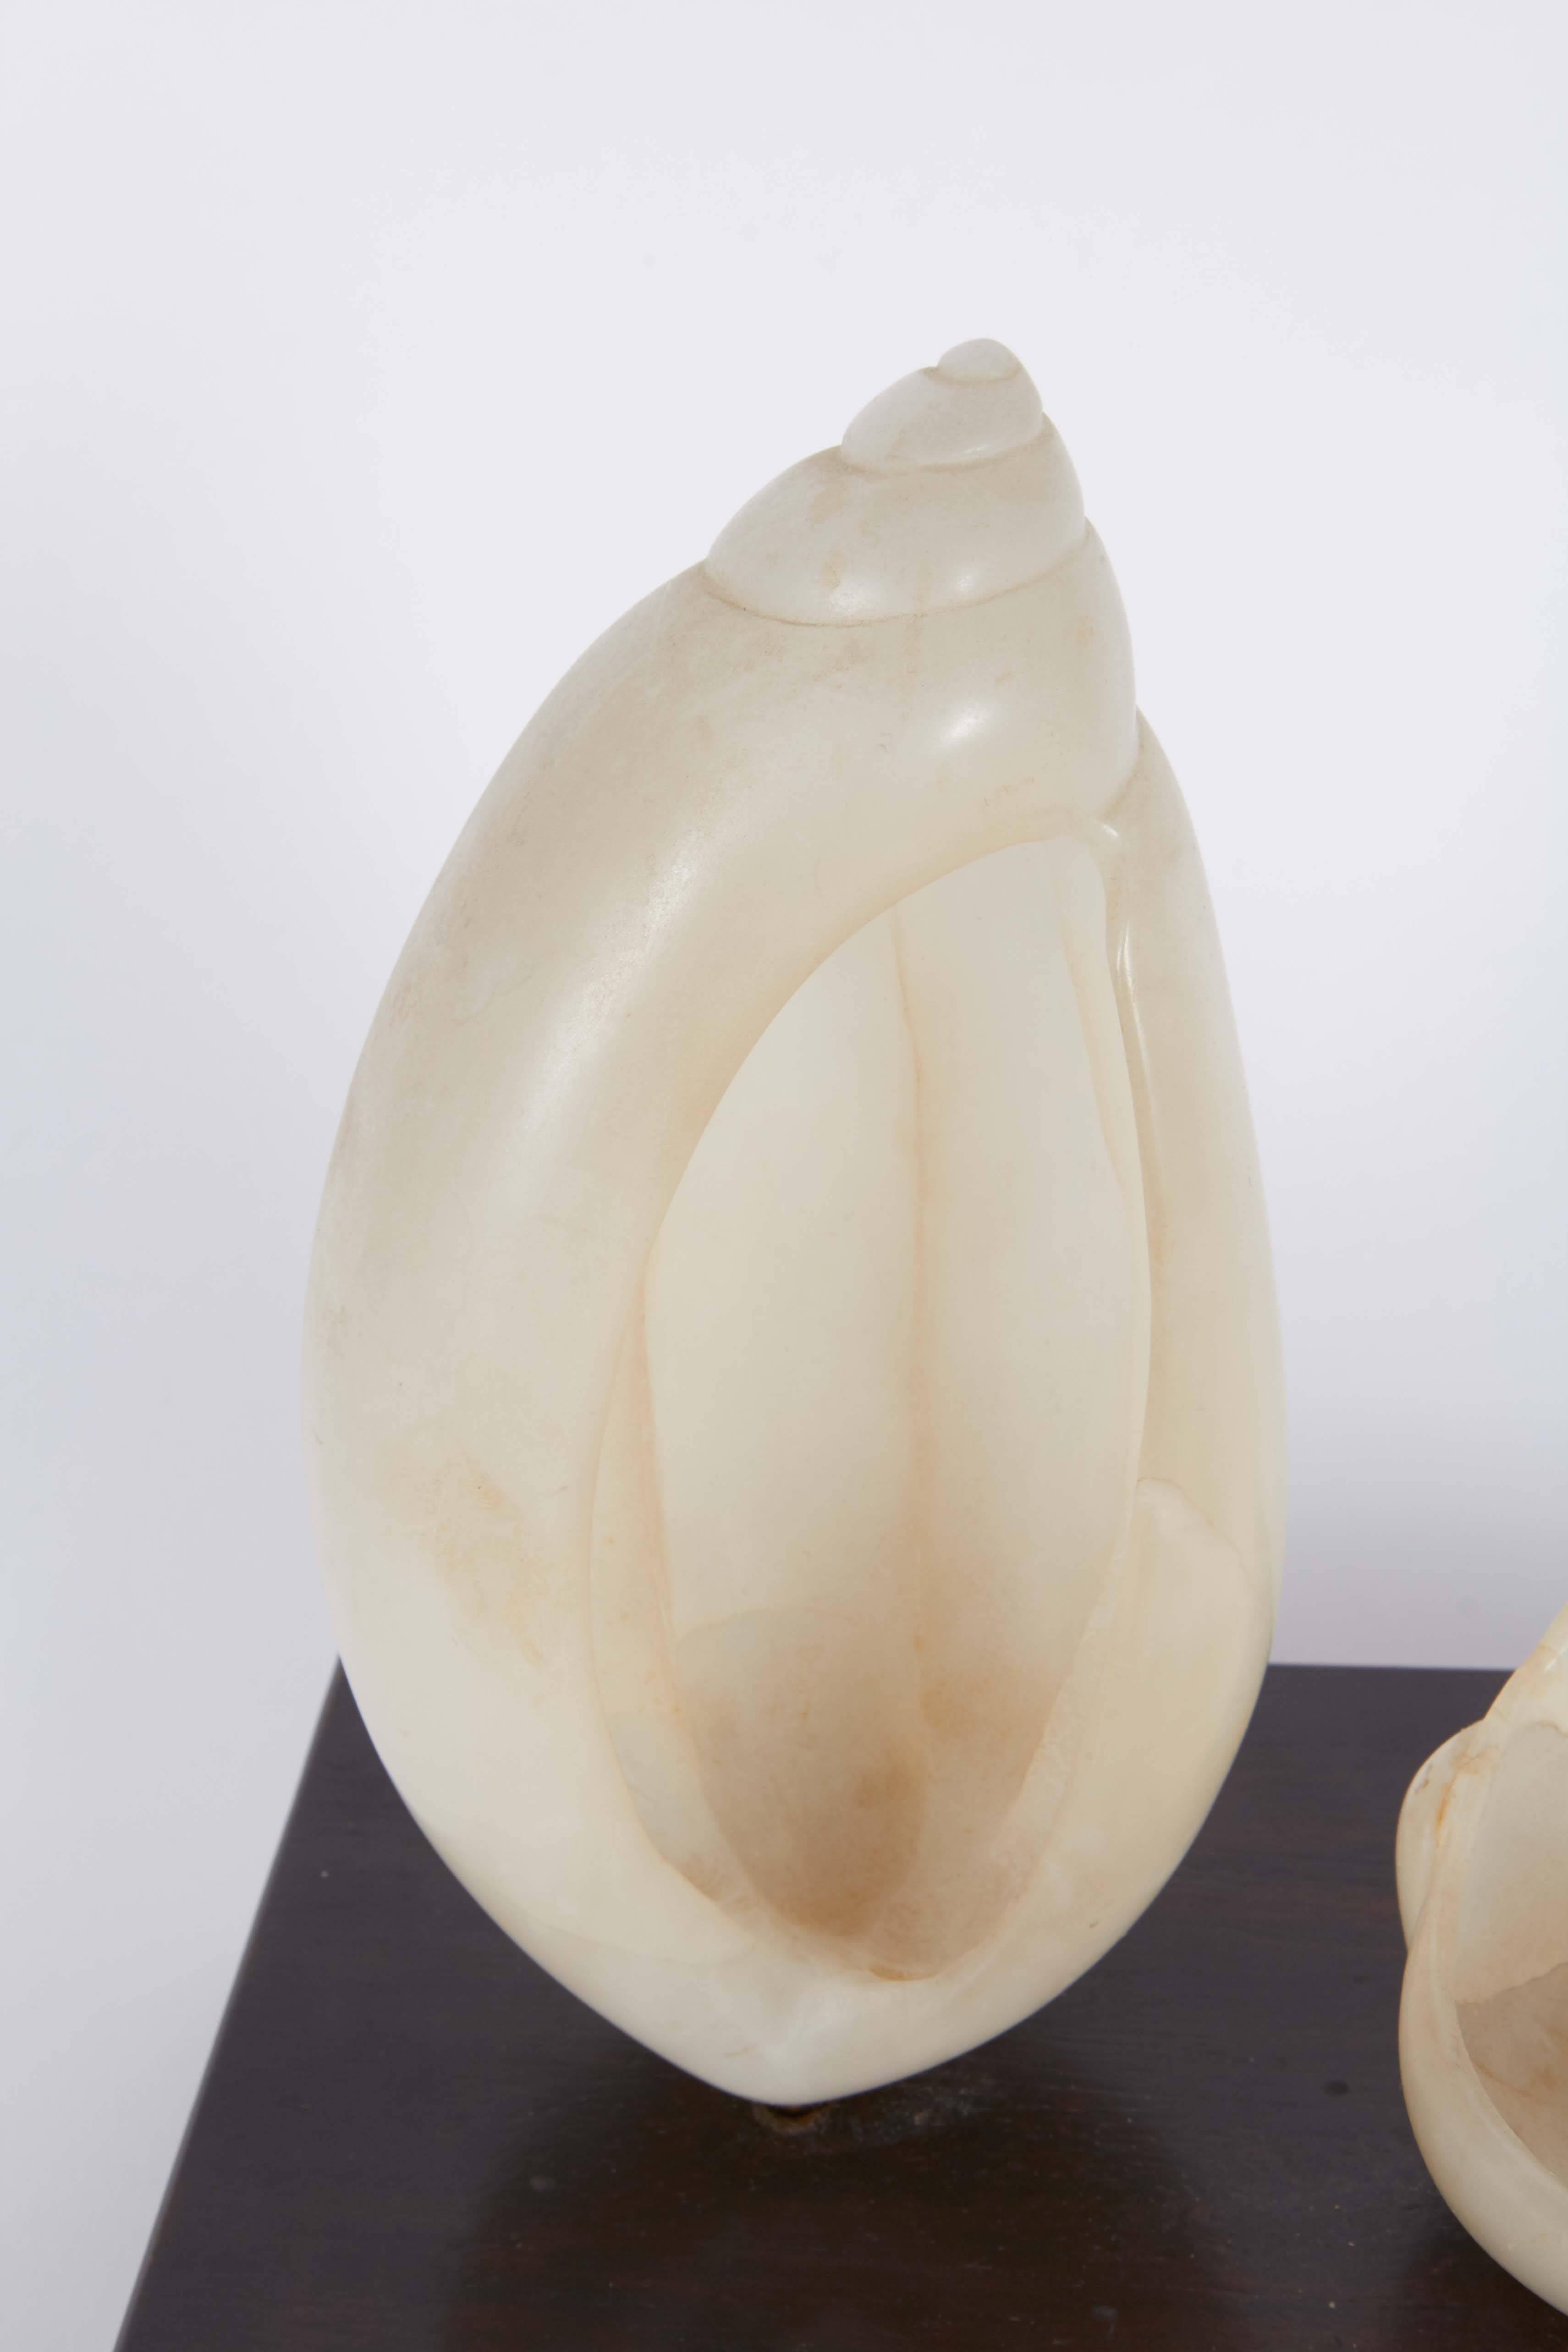 Sculptural shells, crafted of carved and polished alabaster, mounted on a rich toned wooden base. This piece was done by an unknown artist and remains in very good overall condition with age-appropriate wear.